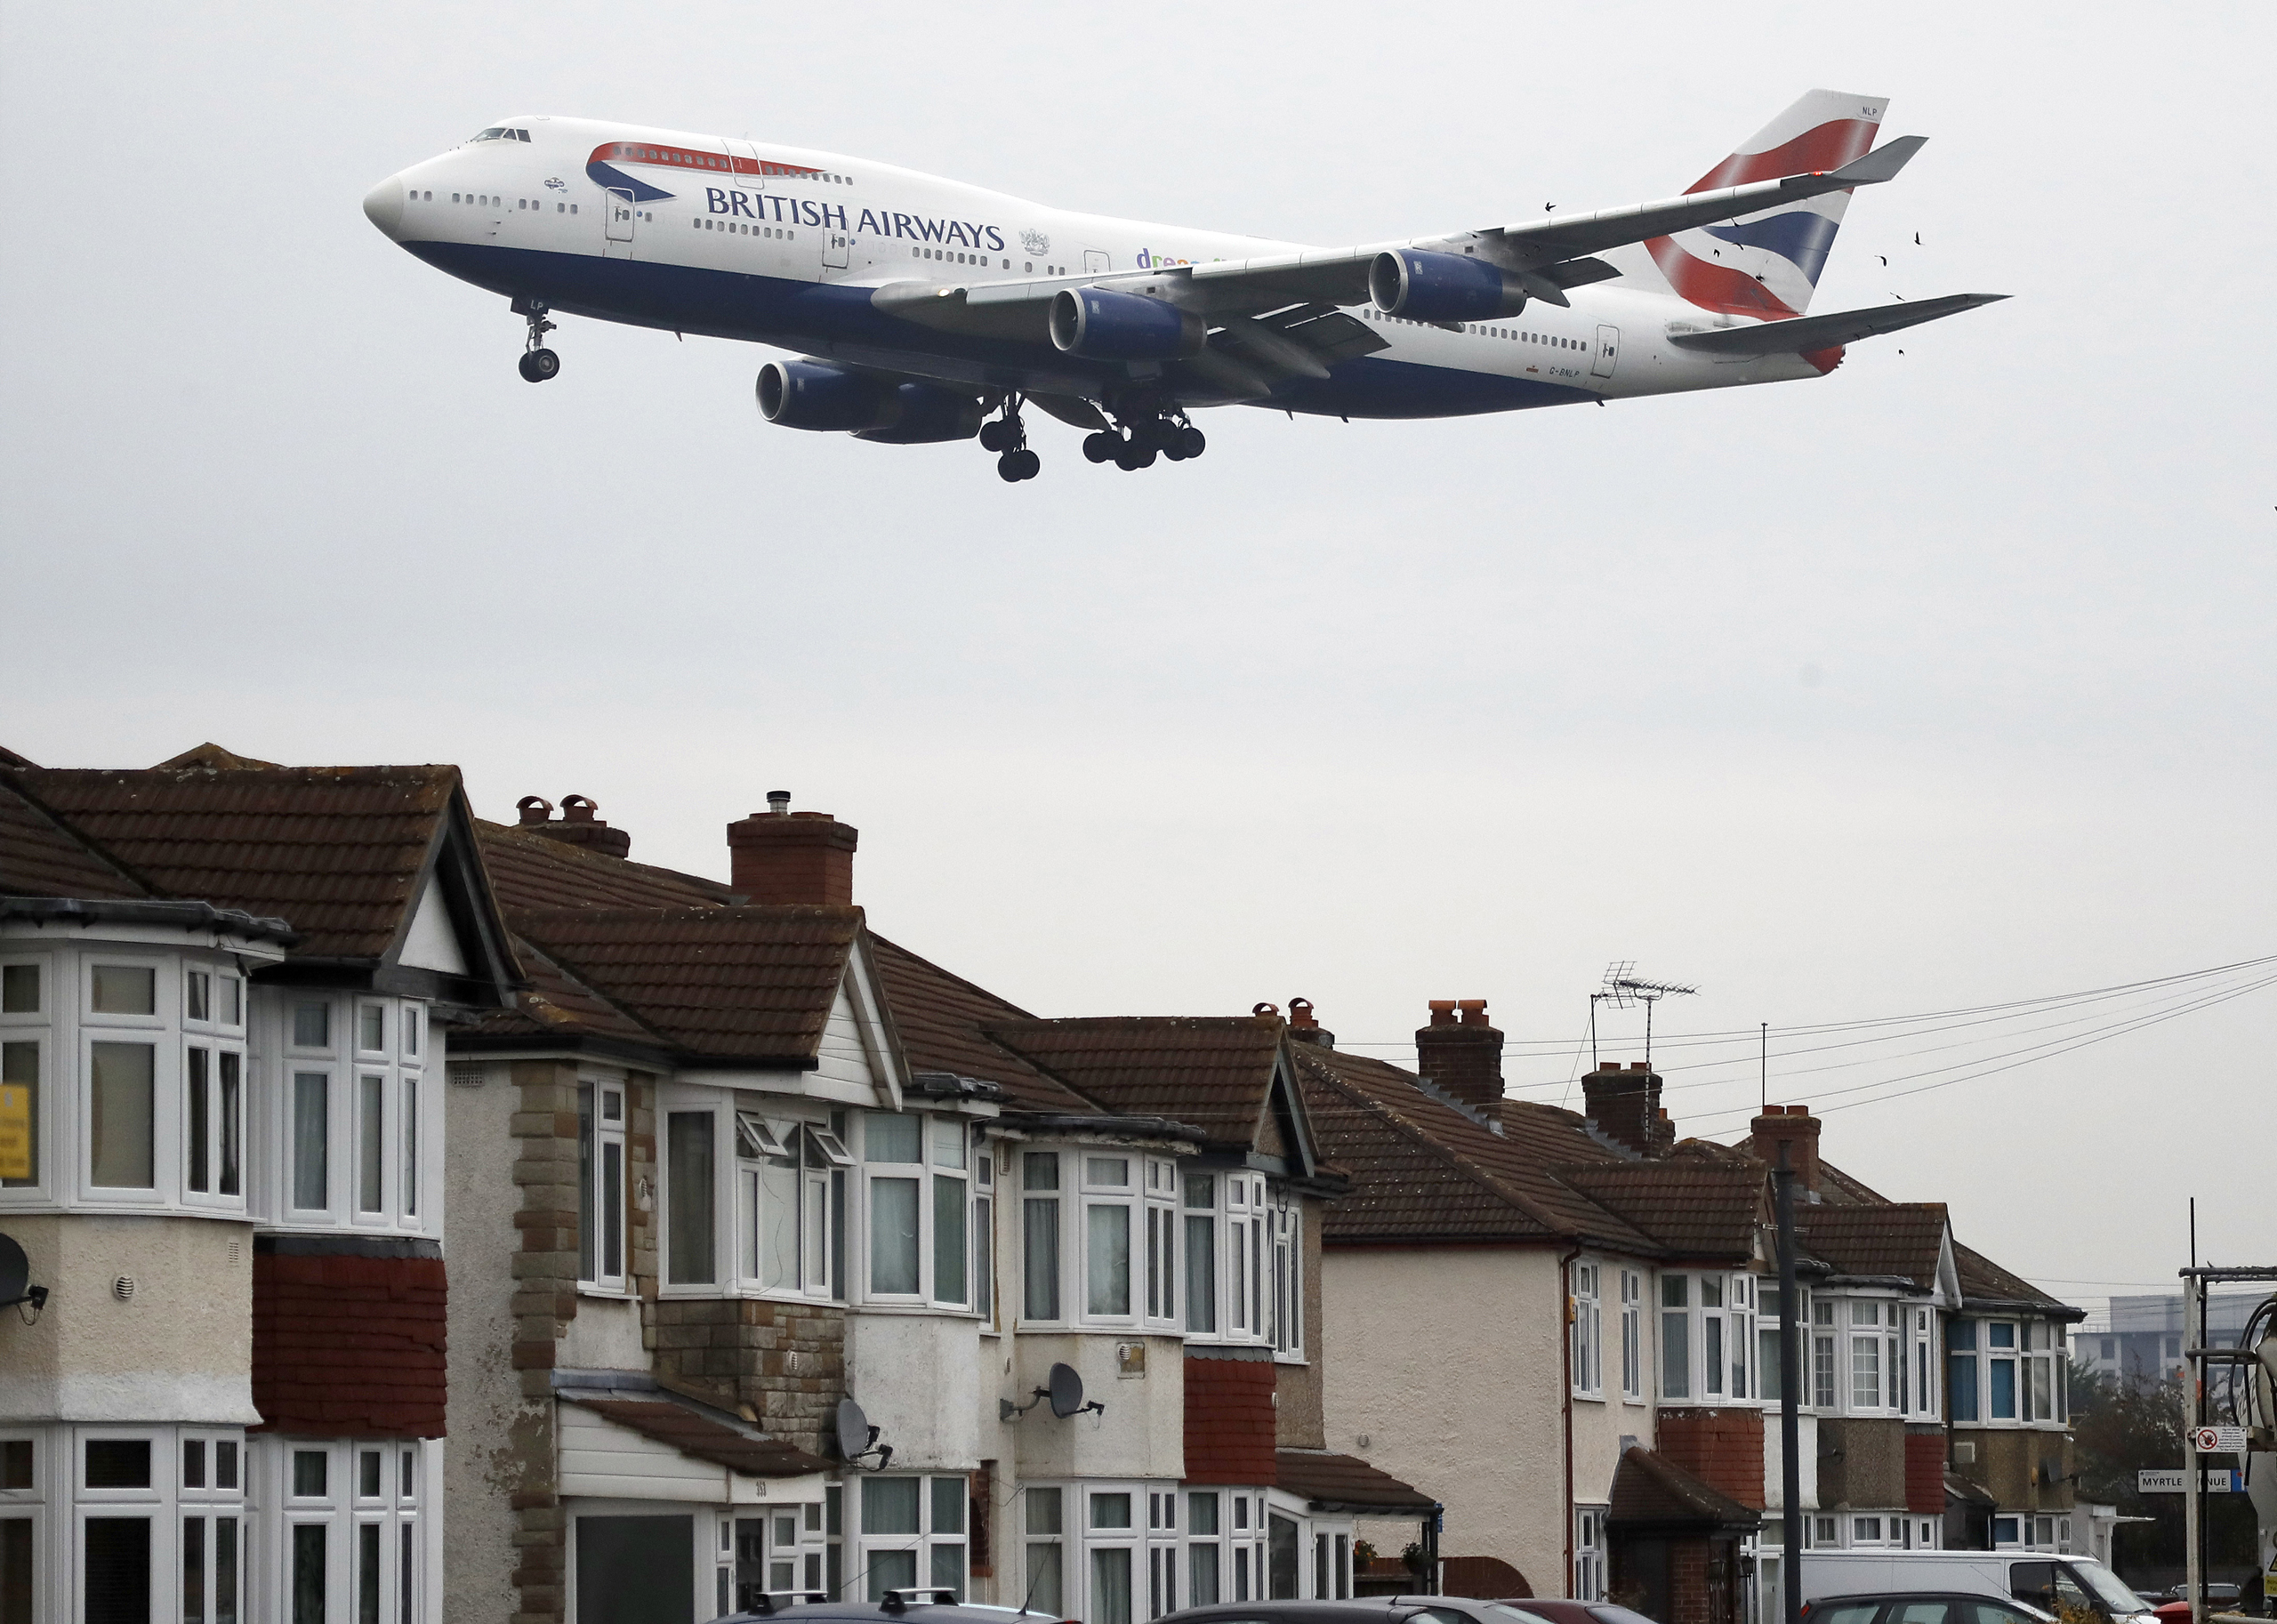 A plane approaches landing over the rooftops of nearby houses at Heathrow Airport in London, on Oct. 25, 2016. (Frank Augstein—AP)